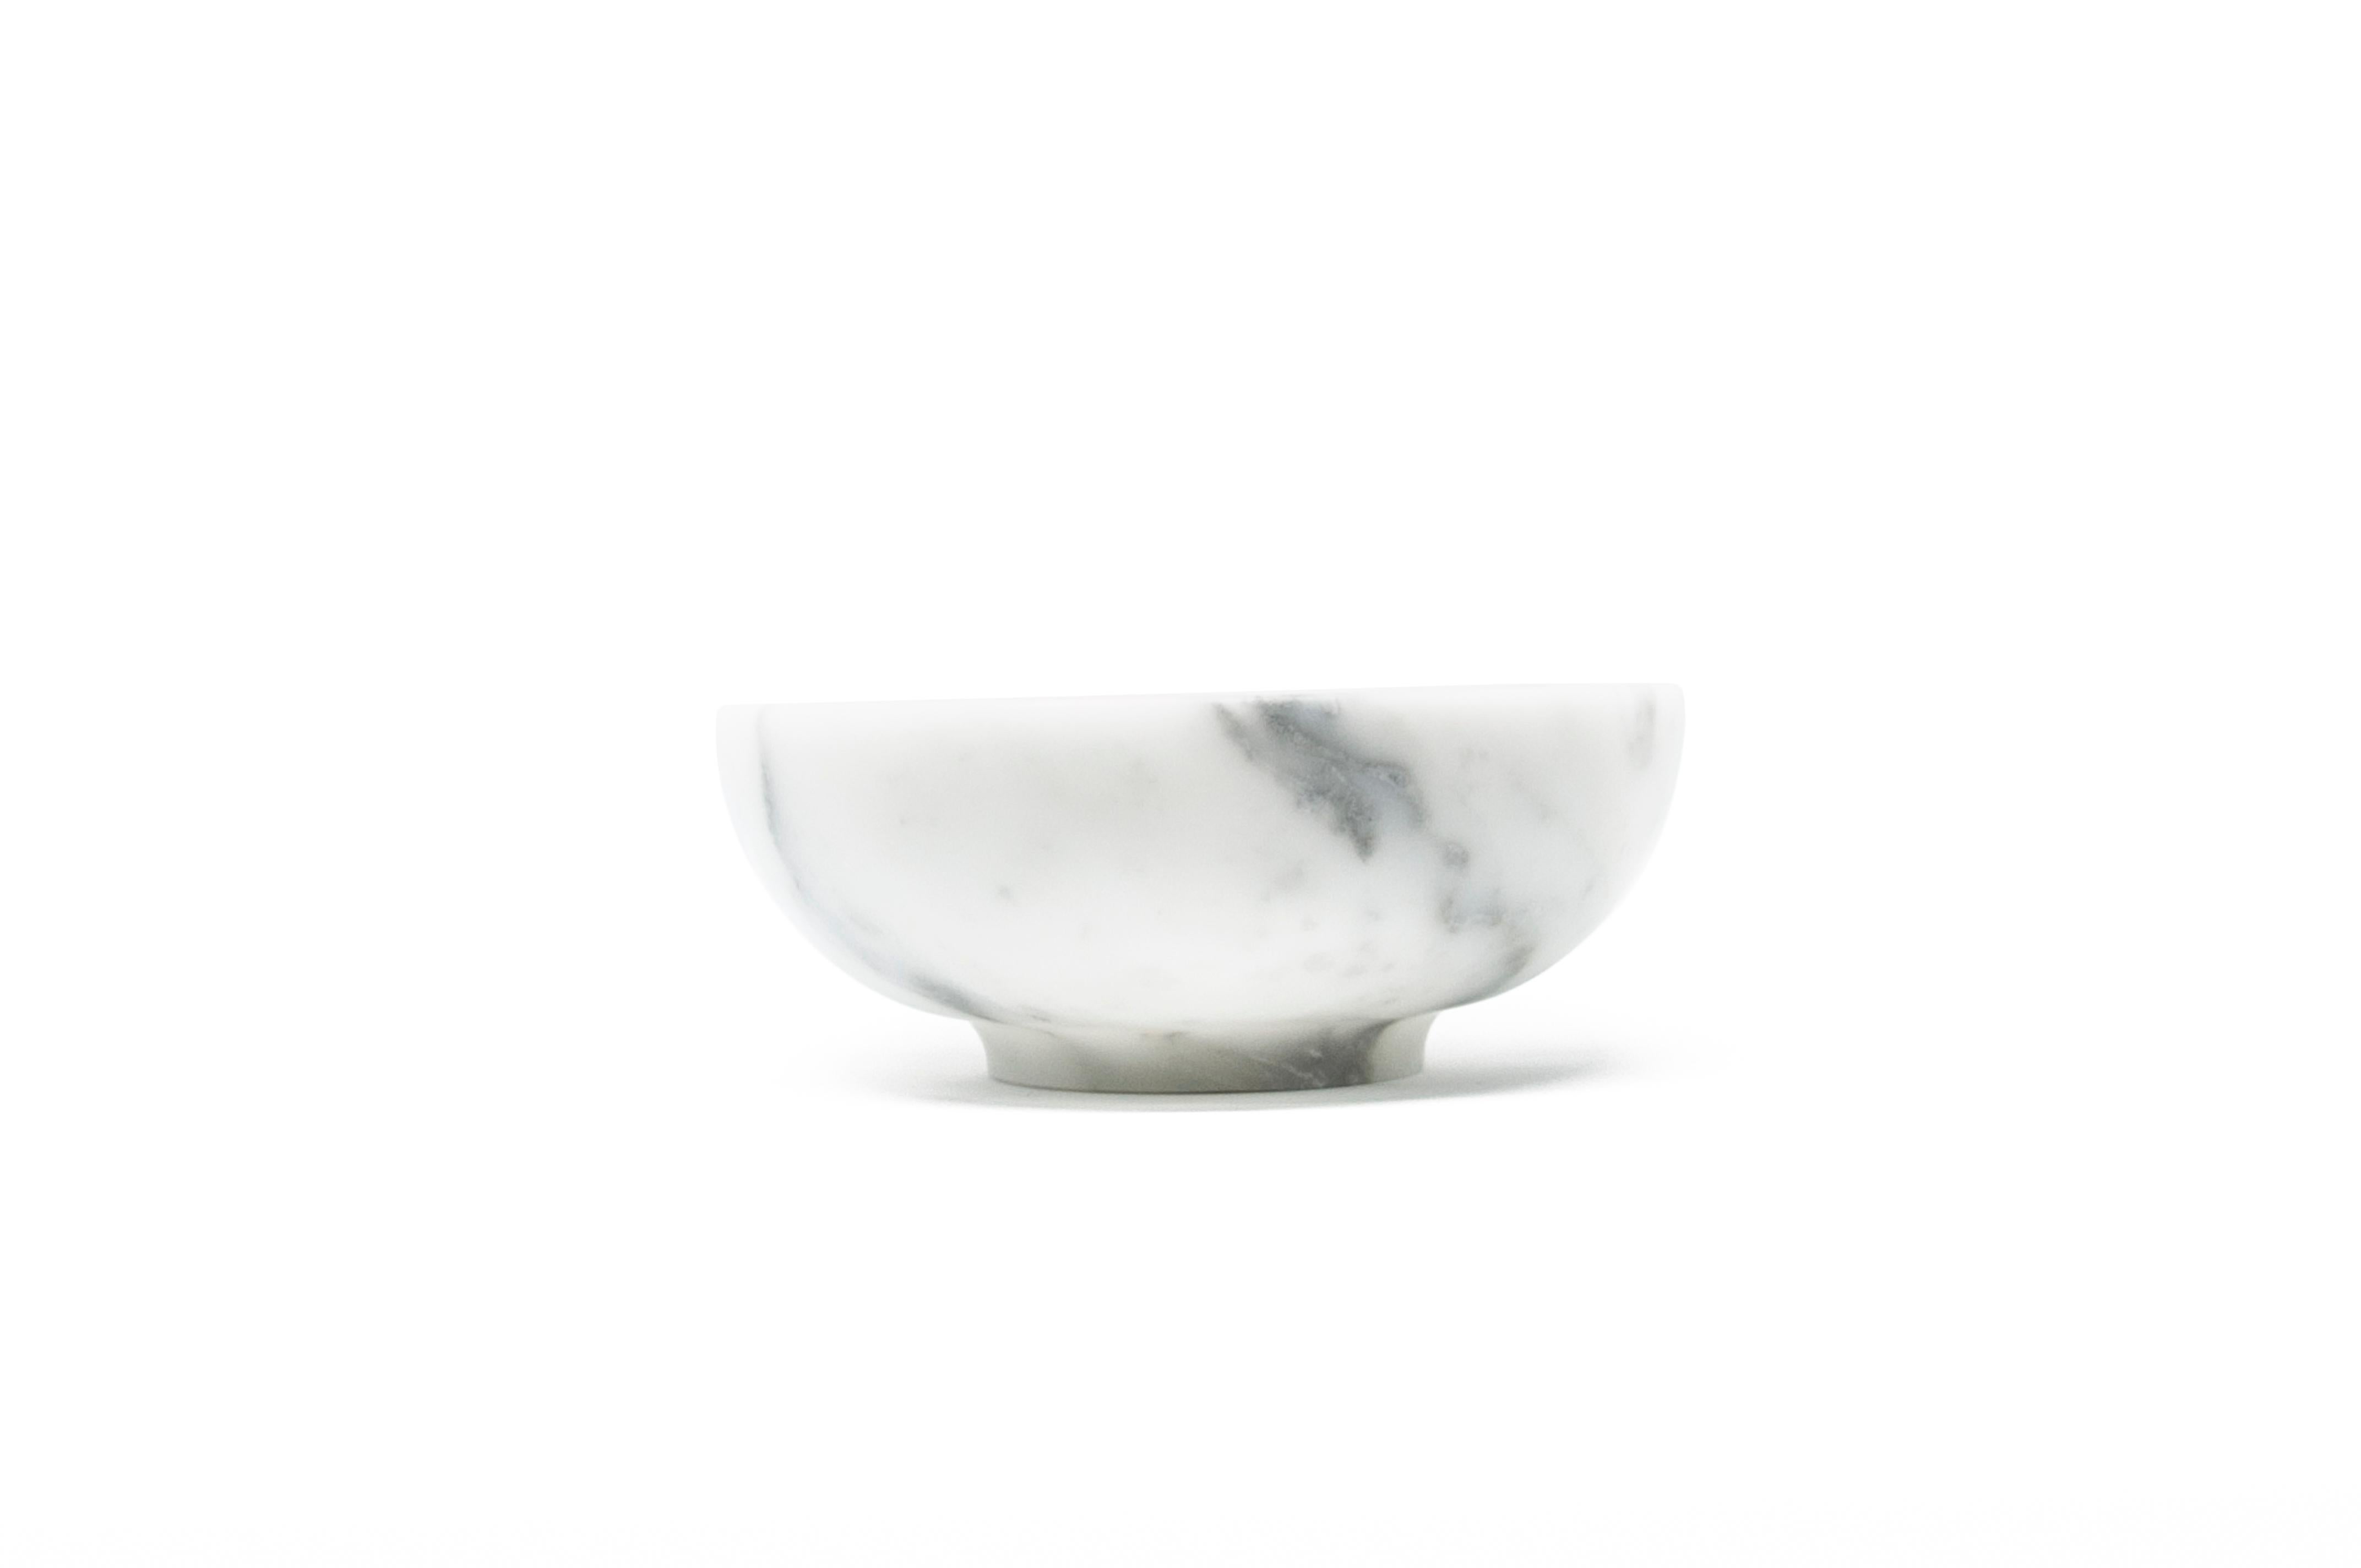 Rice bowl in satin white Carrara marble, extracted and processed in Italy. You have a 100% made in Italy product.
Each piece is in a way unique (since each marble block is different in veins and shades) and handmade by Italian artisans specialized